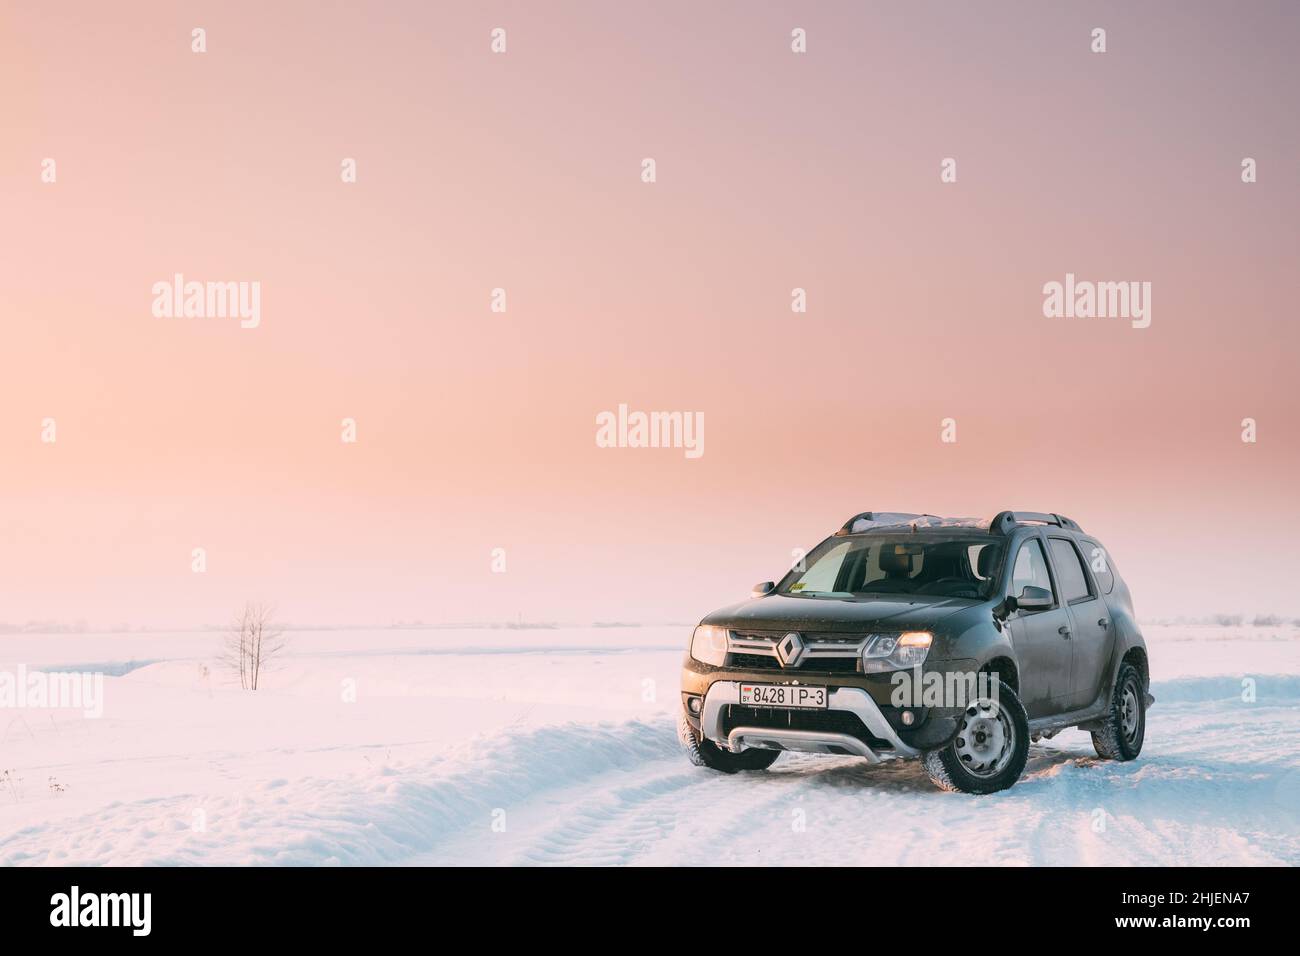 Gomel, Belarus. Car Renault Duster Or Dacia Duster Suv Parked On Winter Snowy Field At Sunset Dawn Sunrise. Stock Photo